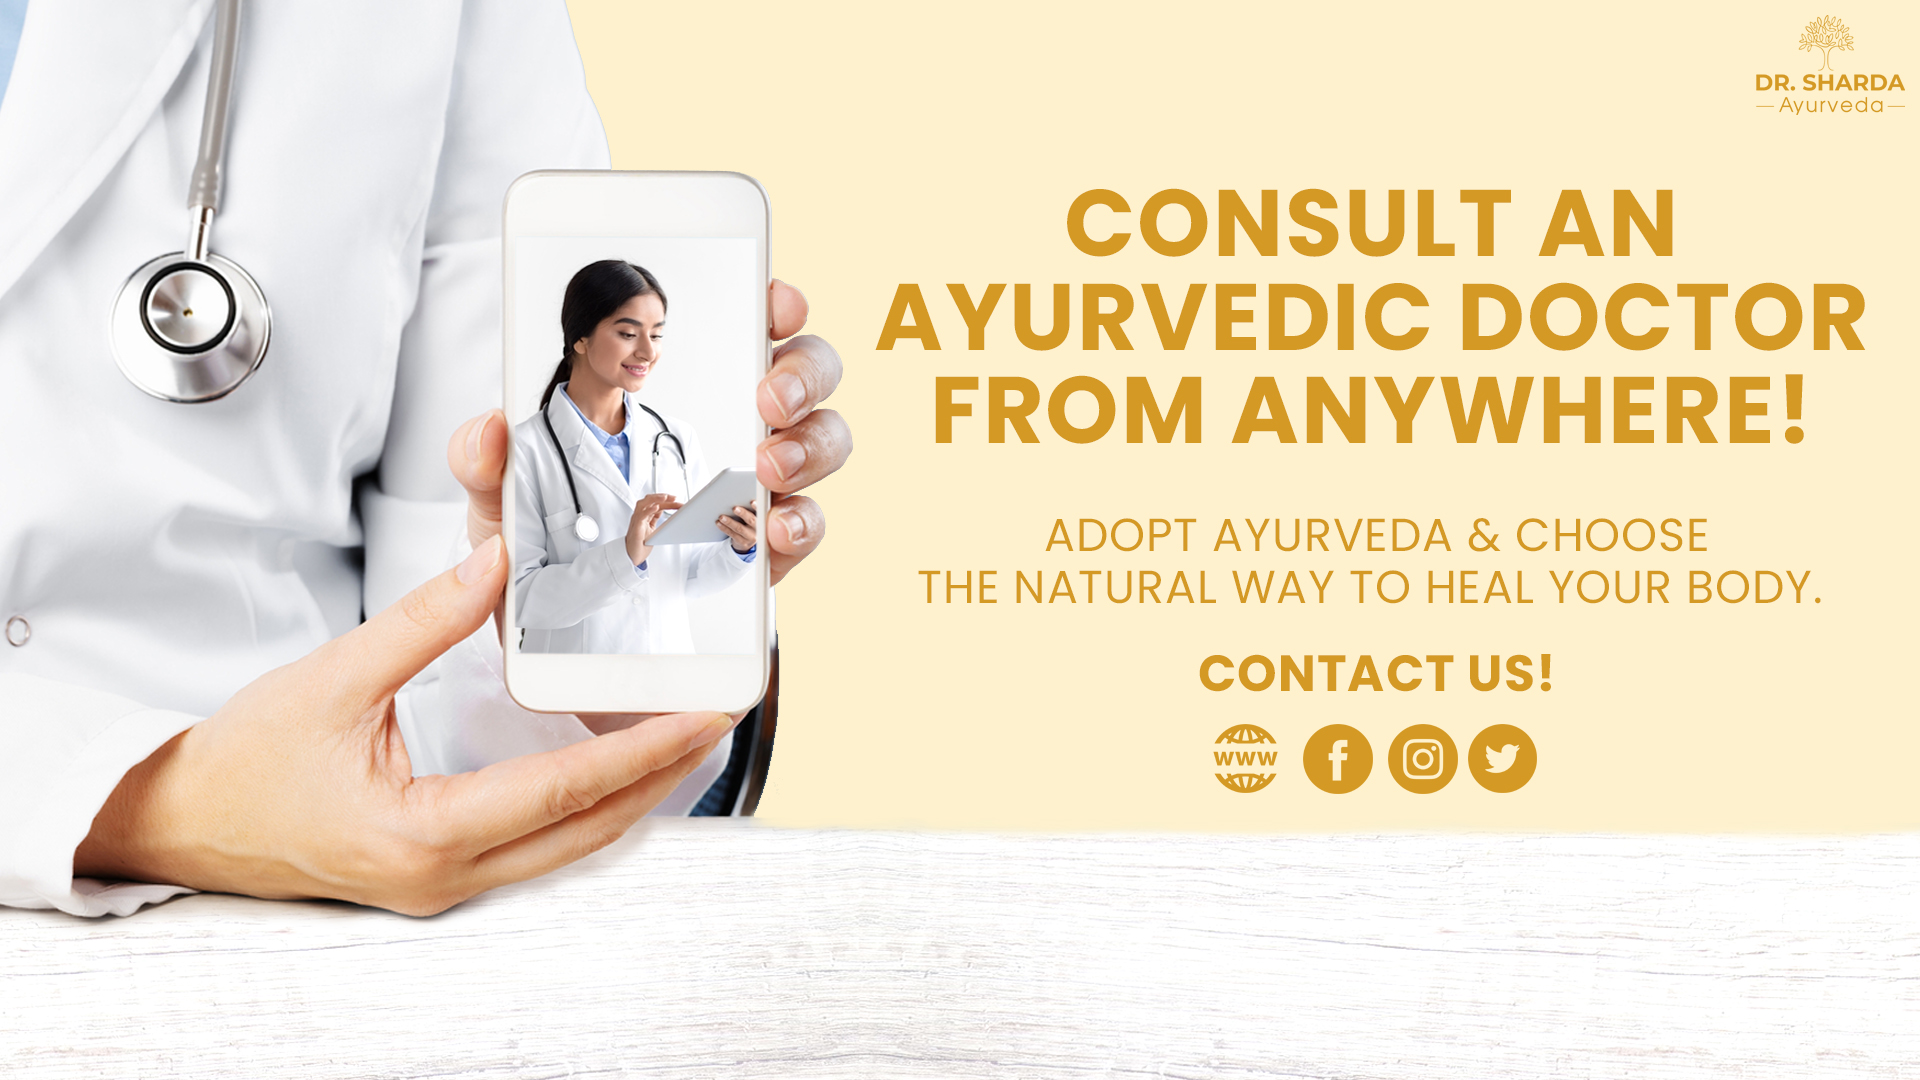 DR. SHARDA
Ayurveda

CONSULT AN
. AYURVEDIC DOCTOR
» FROM ANYWHERE!

ADOPT AYURVEDA &amp; CHOOSE
THE NATURAL WAY TO HEAL YOUR BODY.

CONTACT US!

£000